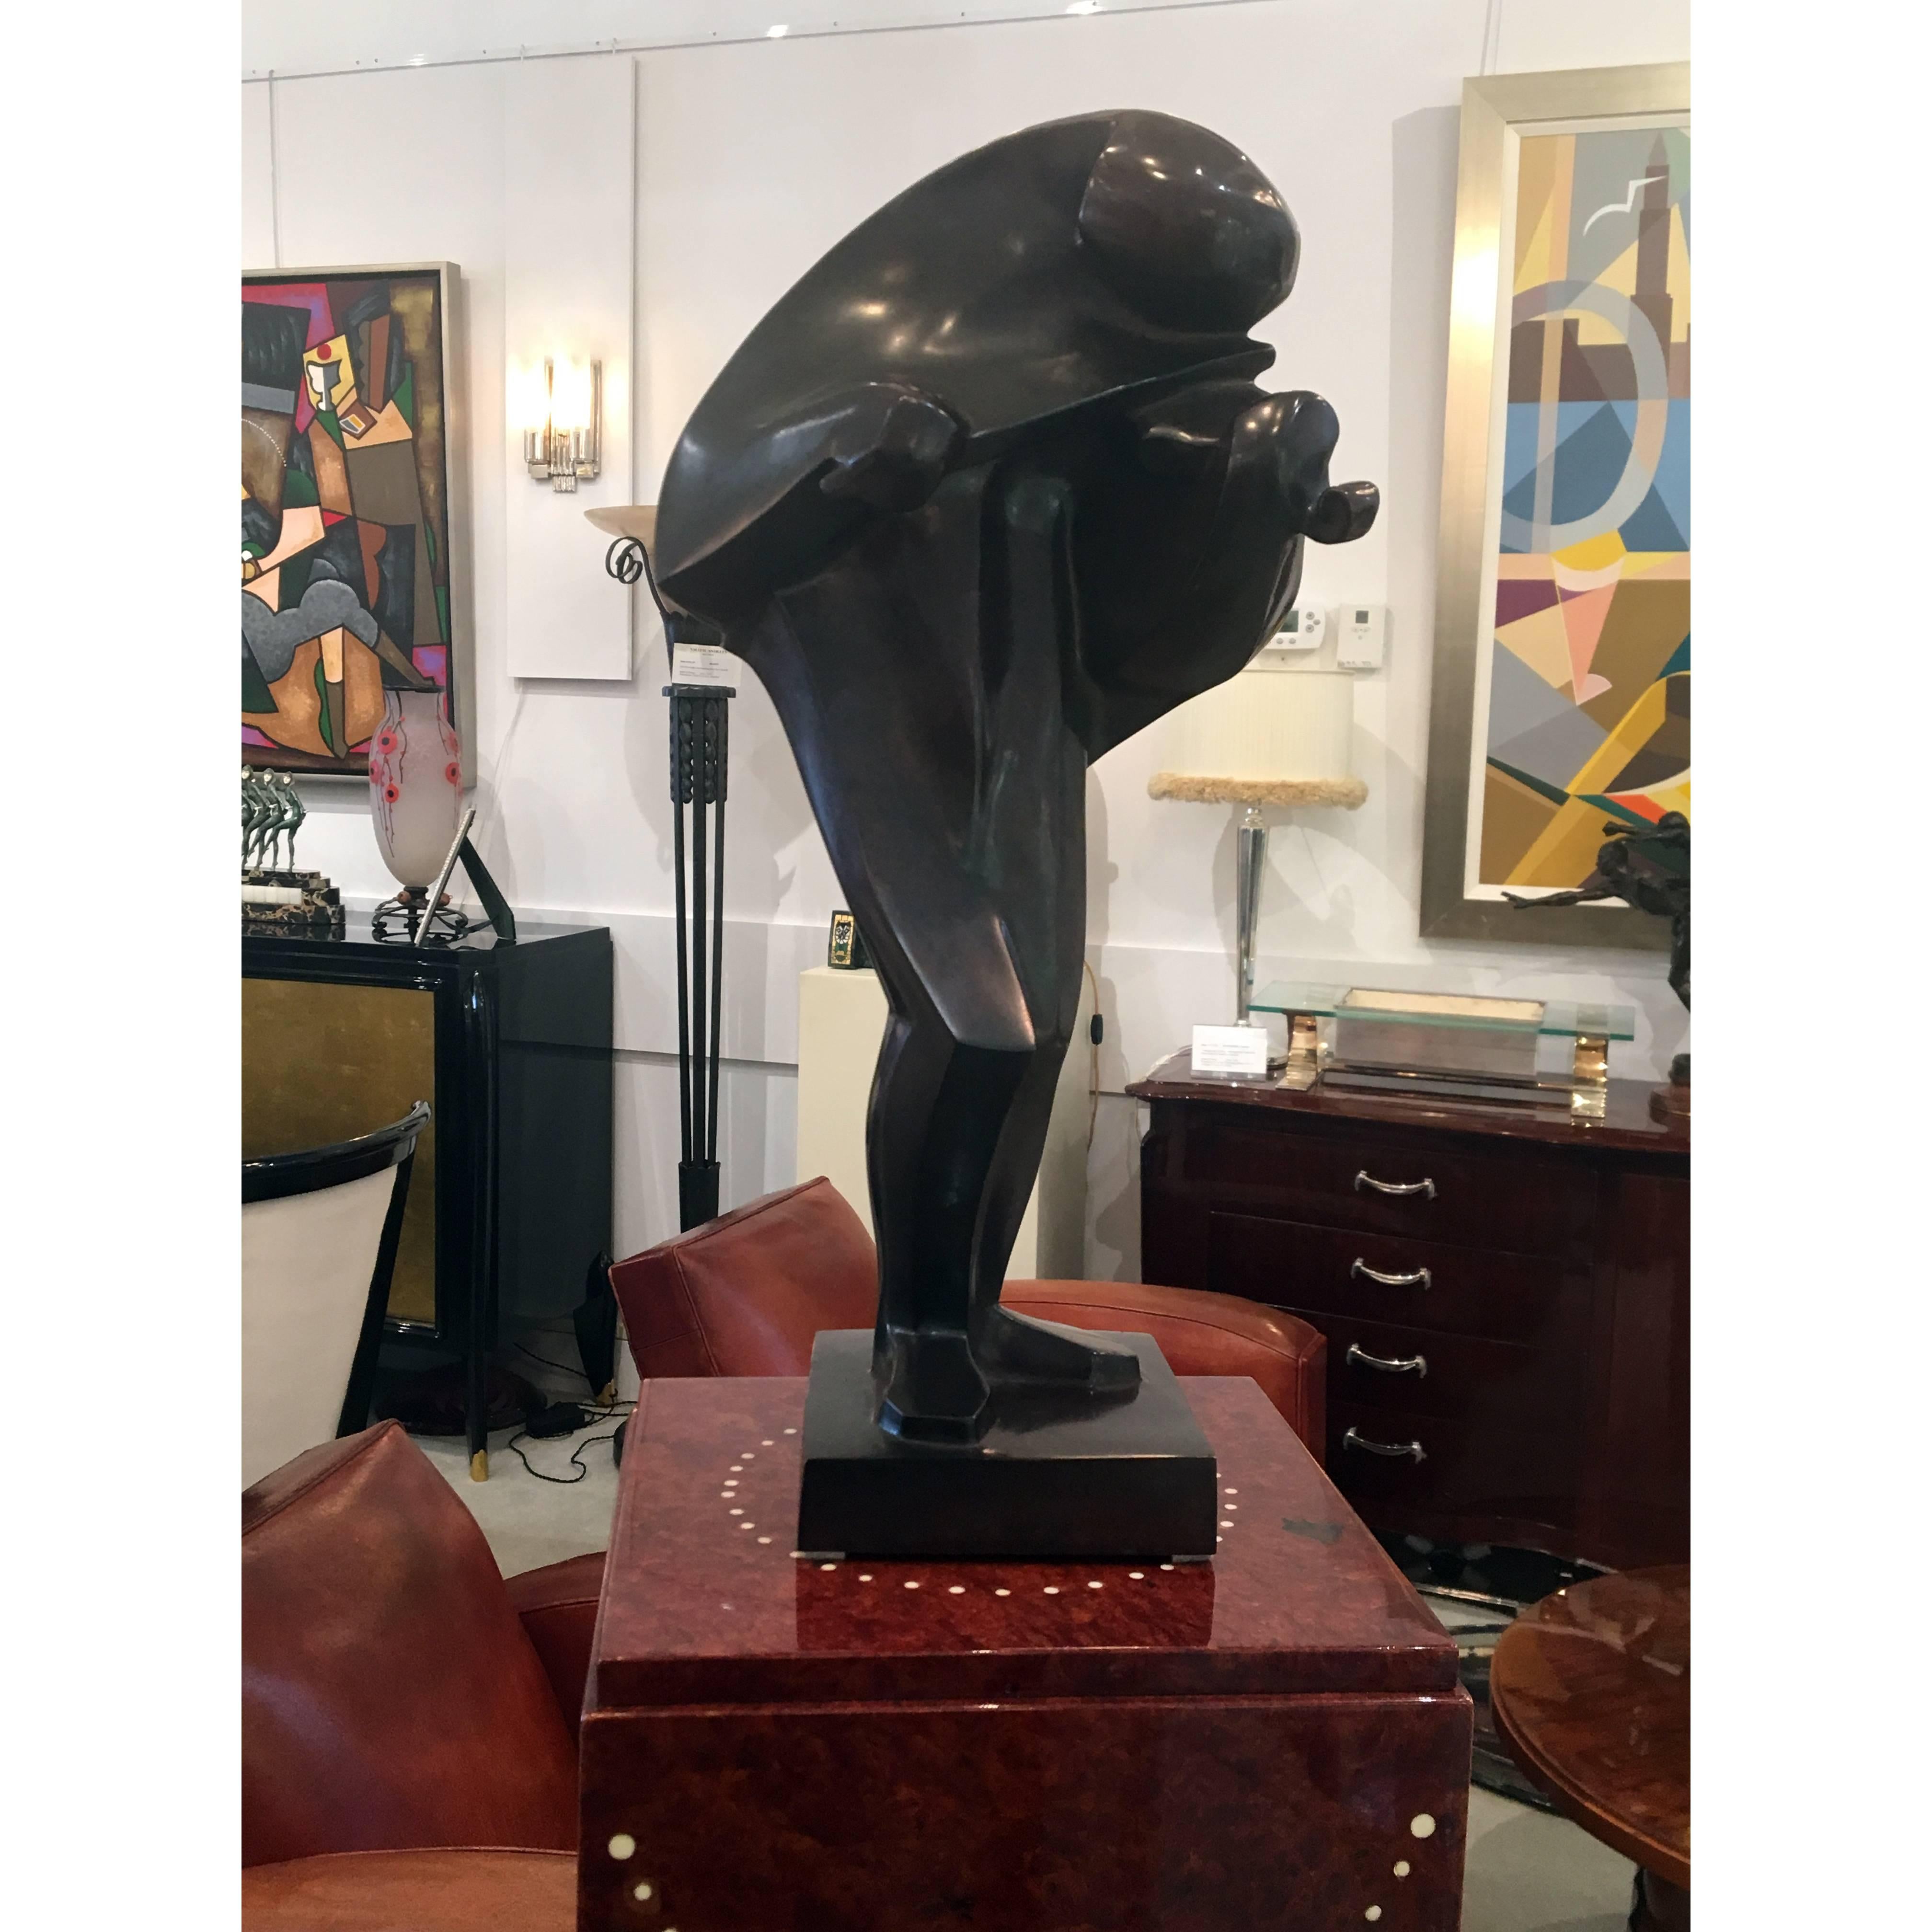 Art Deco Cubist cold patinated bronze sculpture by F. Parpan depicting a Violinist, Designed circa 1938. Re-edited in 2009 numbered #2 edition of 8
Made in France 
Dated 2009
Signature: F.Parpan, numbered 2/8 with artist's cipher
Ref: Ferdinand